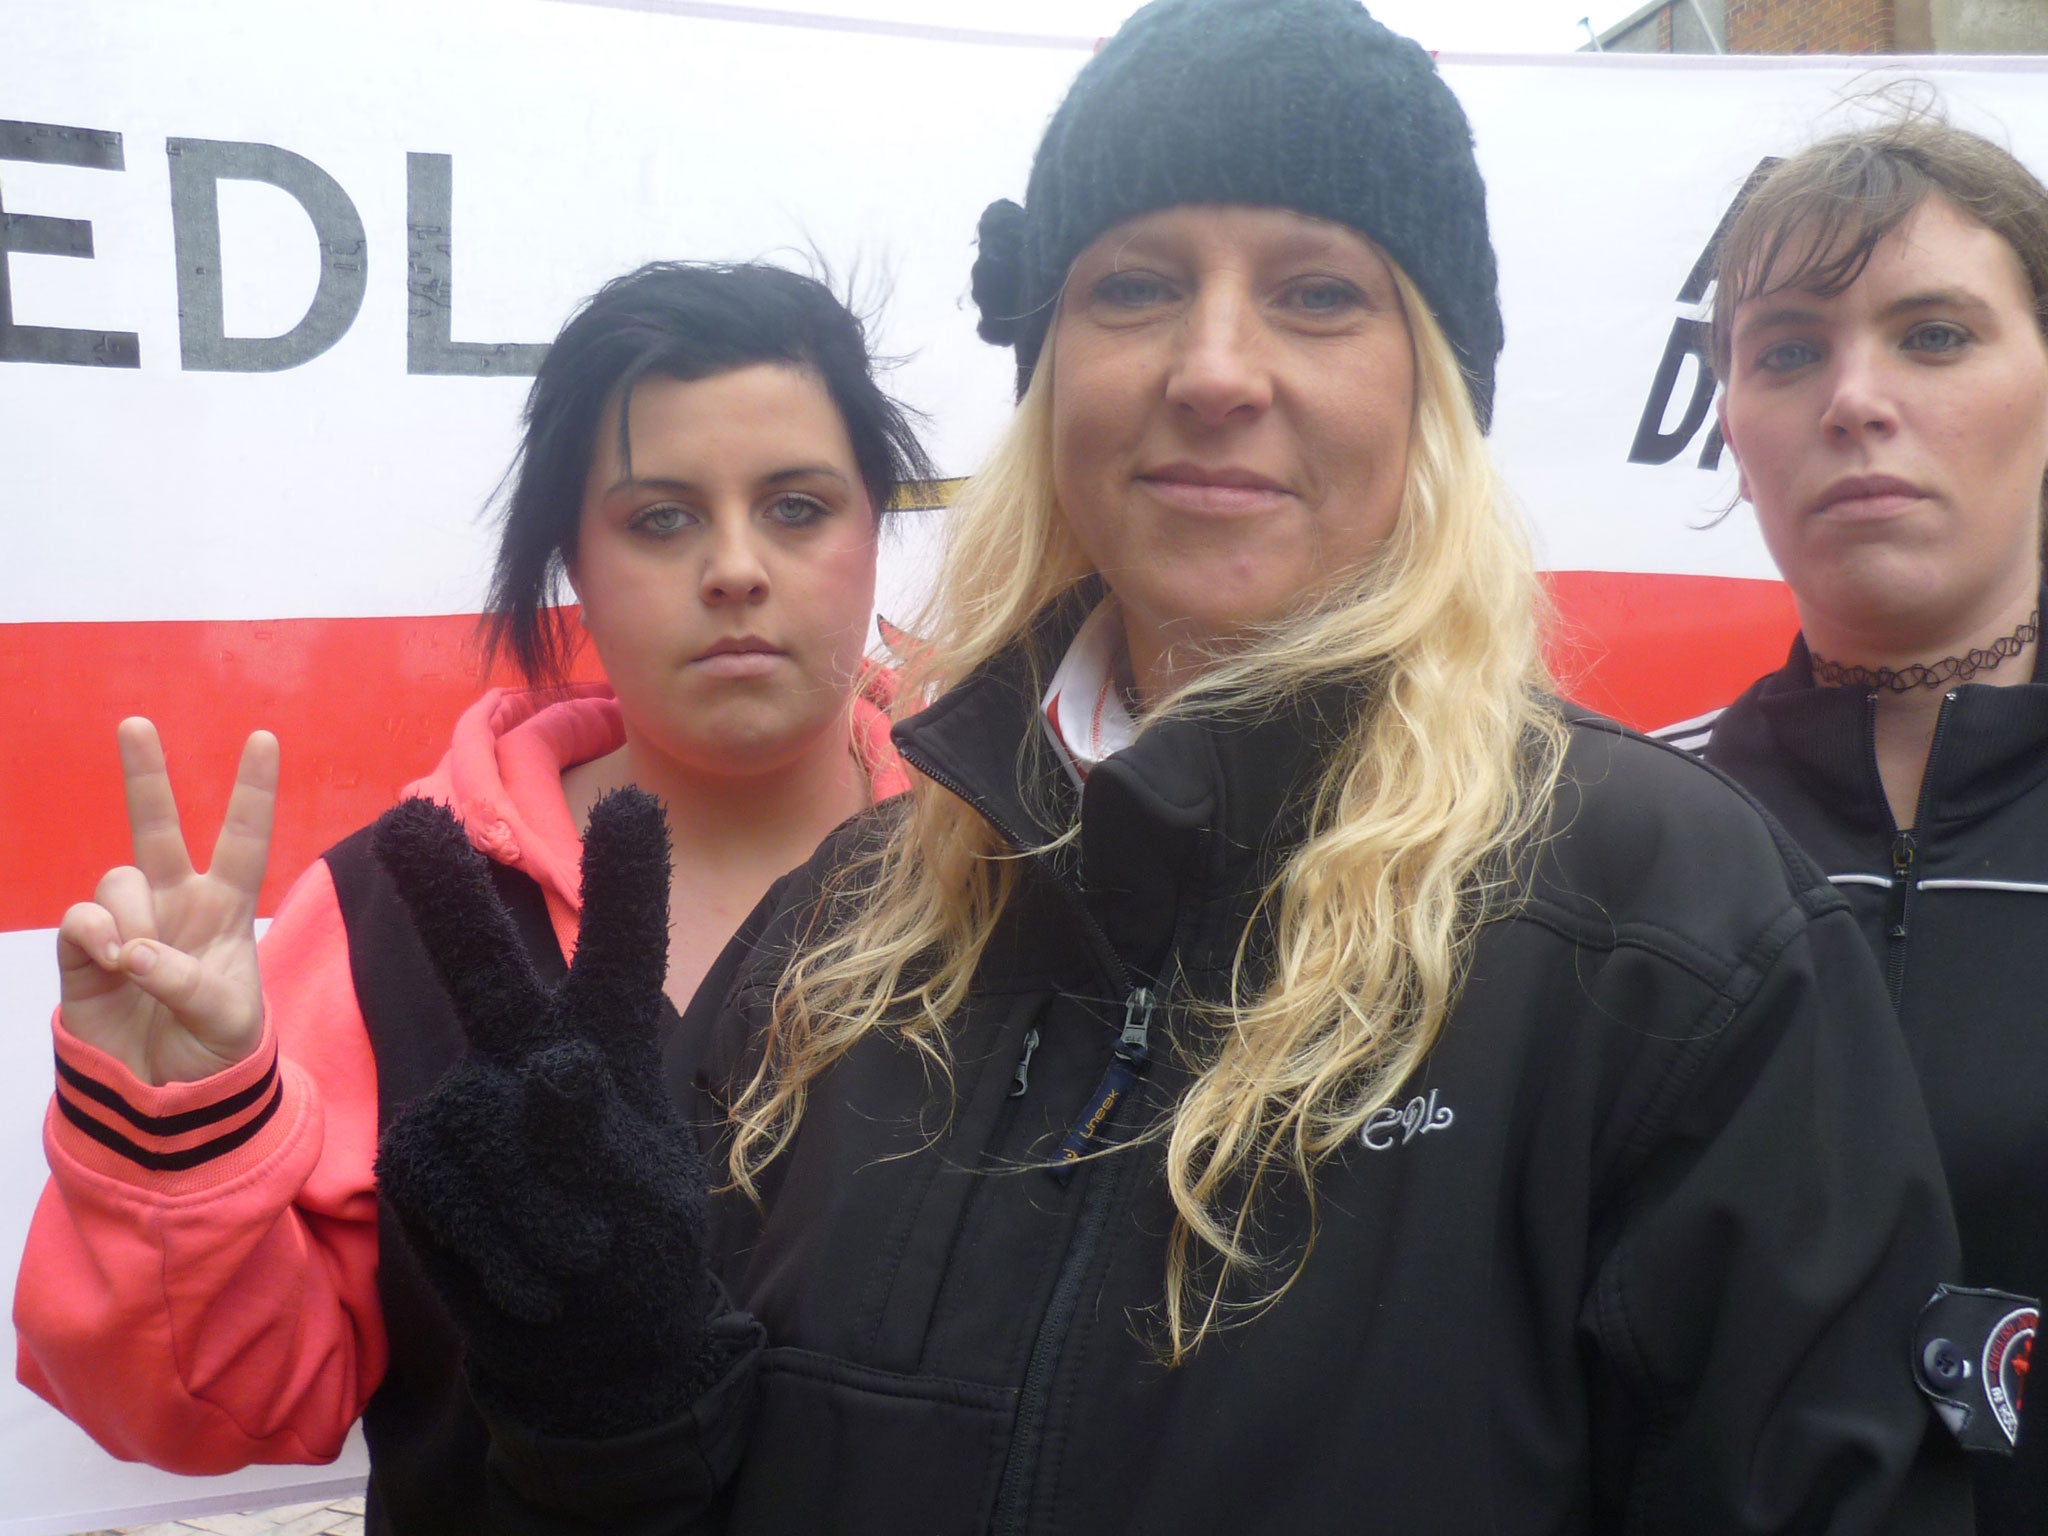 EDL Angels at a street demonstration